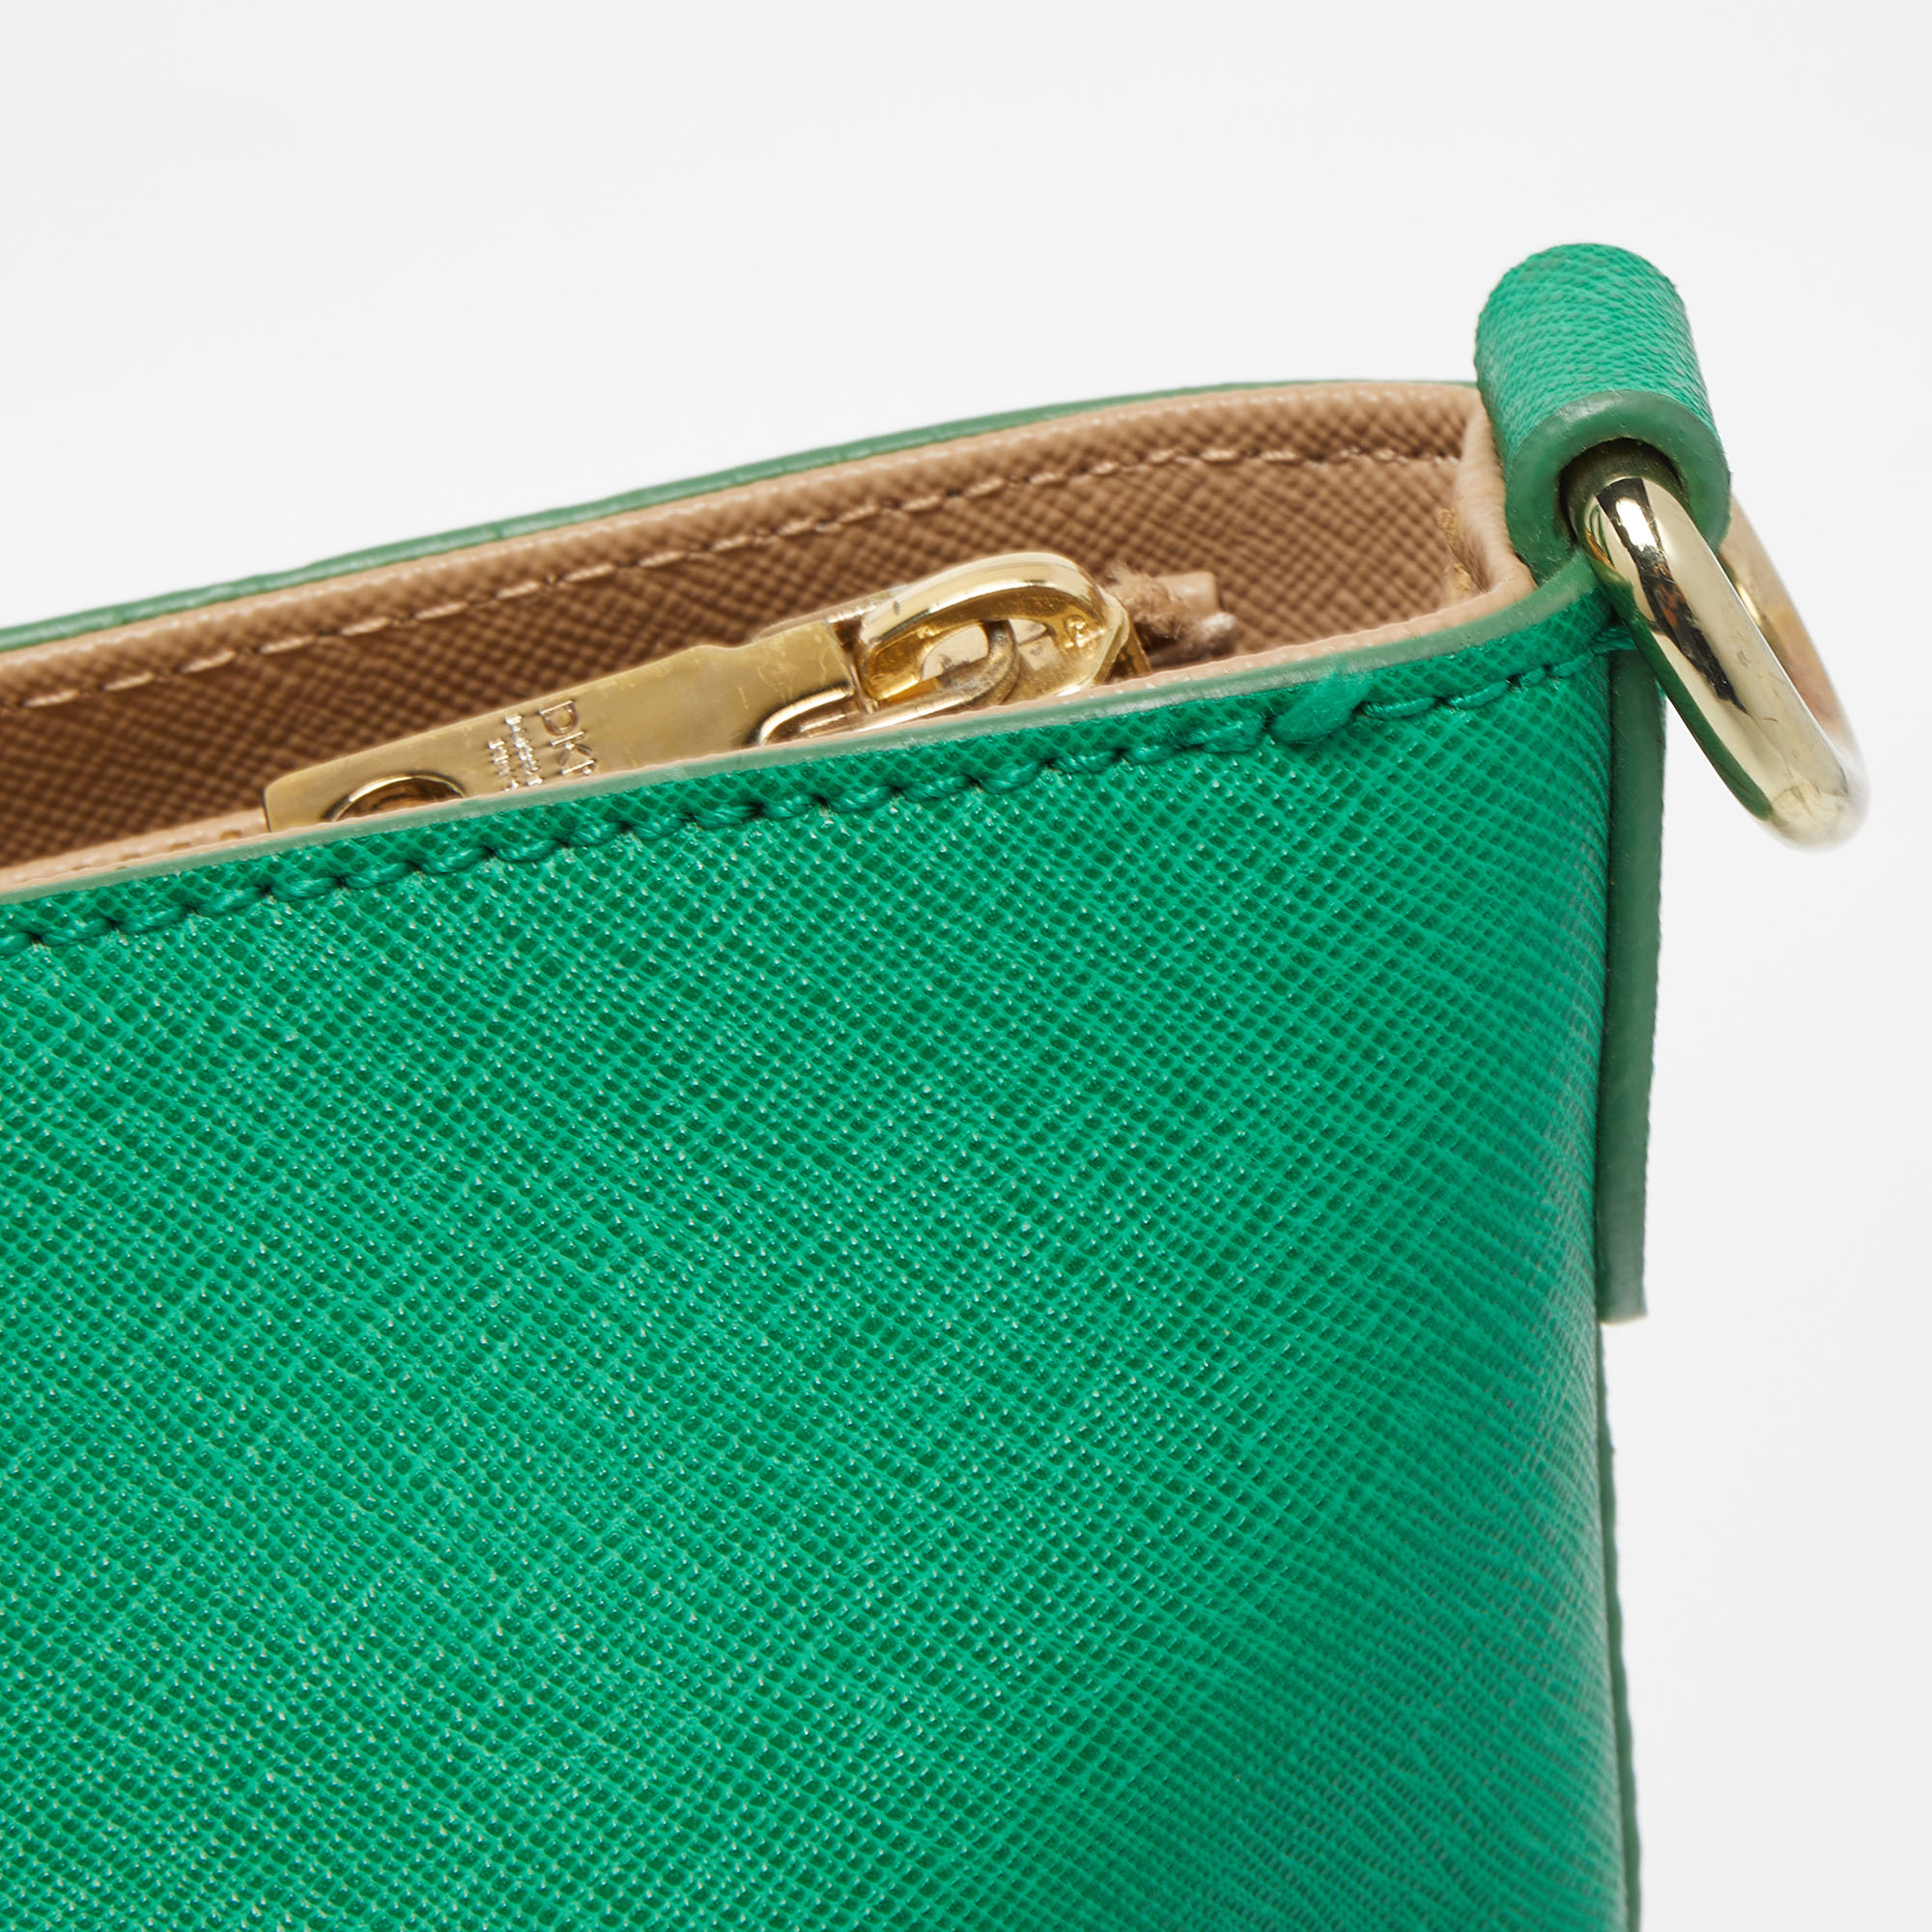 Dkny Green Leather Top Zip  Tote